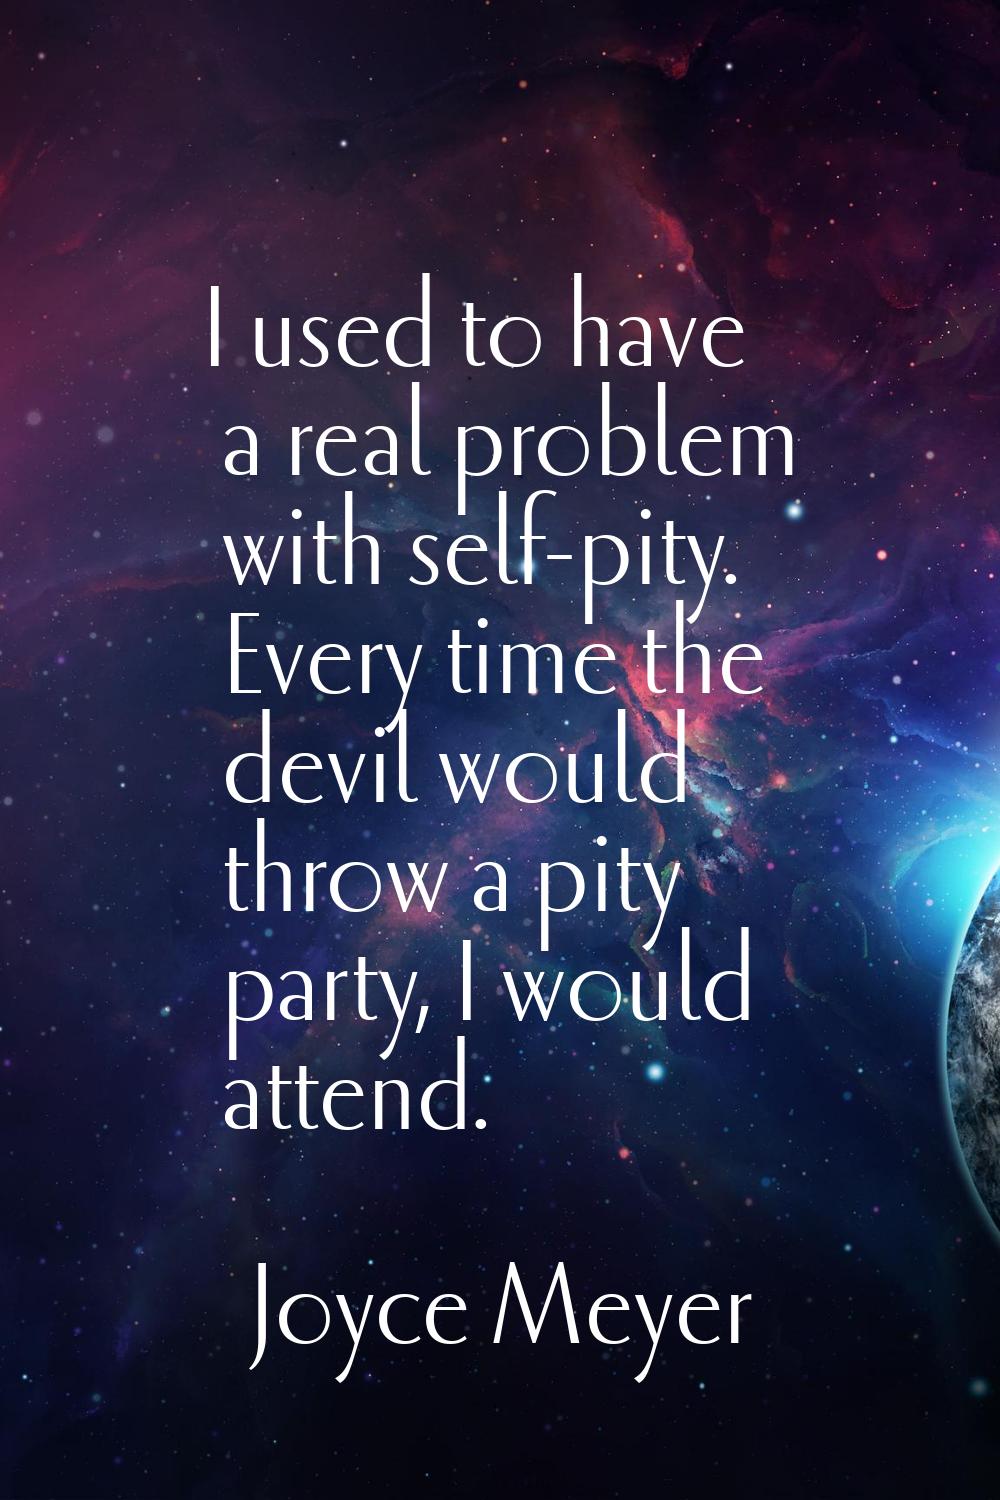 I used to have a real problem with self-pity. Every time the devil would throw a pity party, I woul